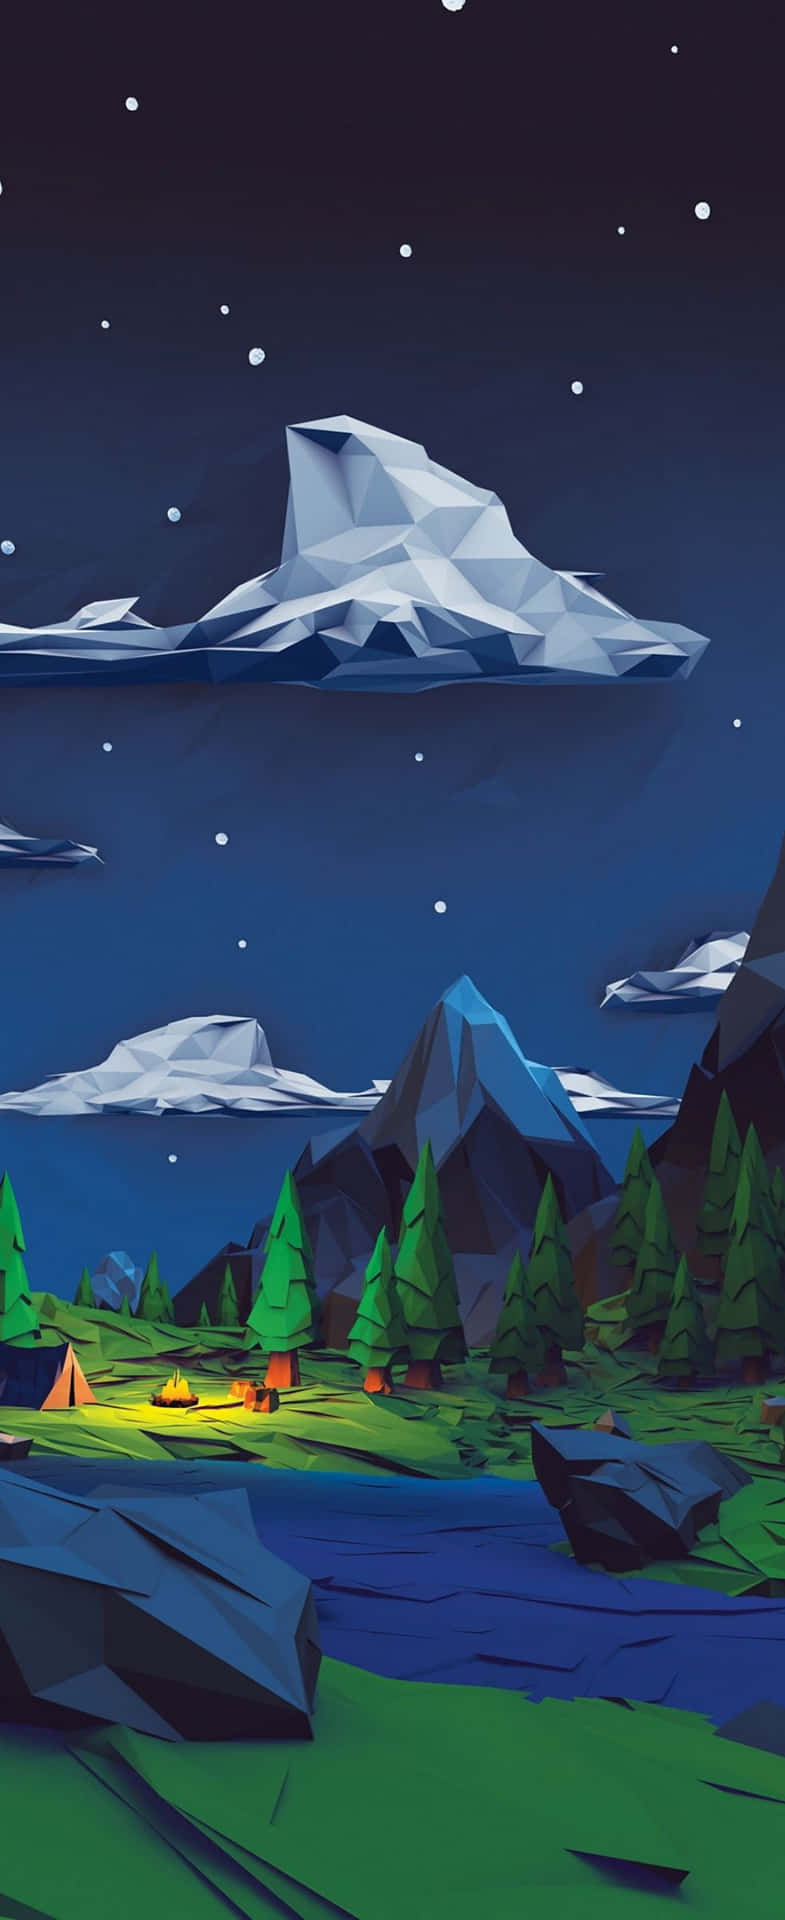 A Night Scene With Mountains And Clouds Wallpaper